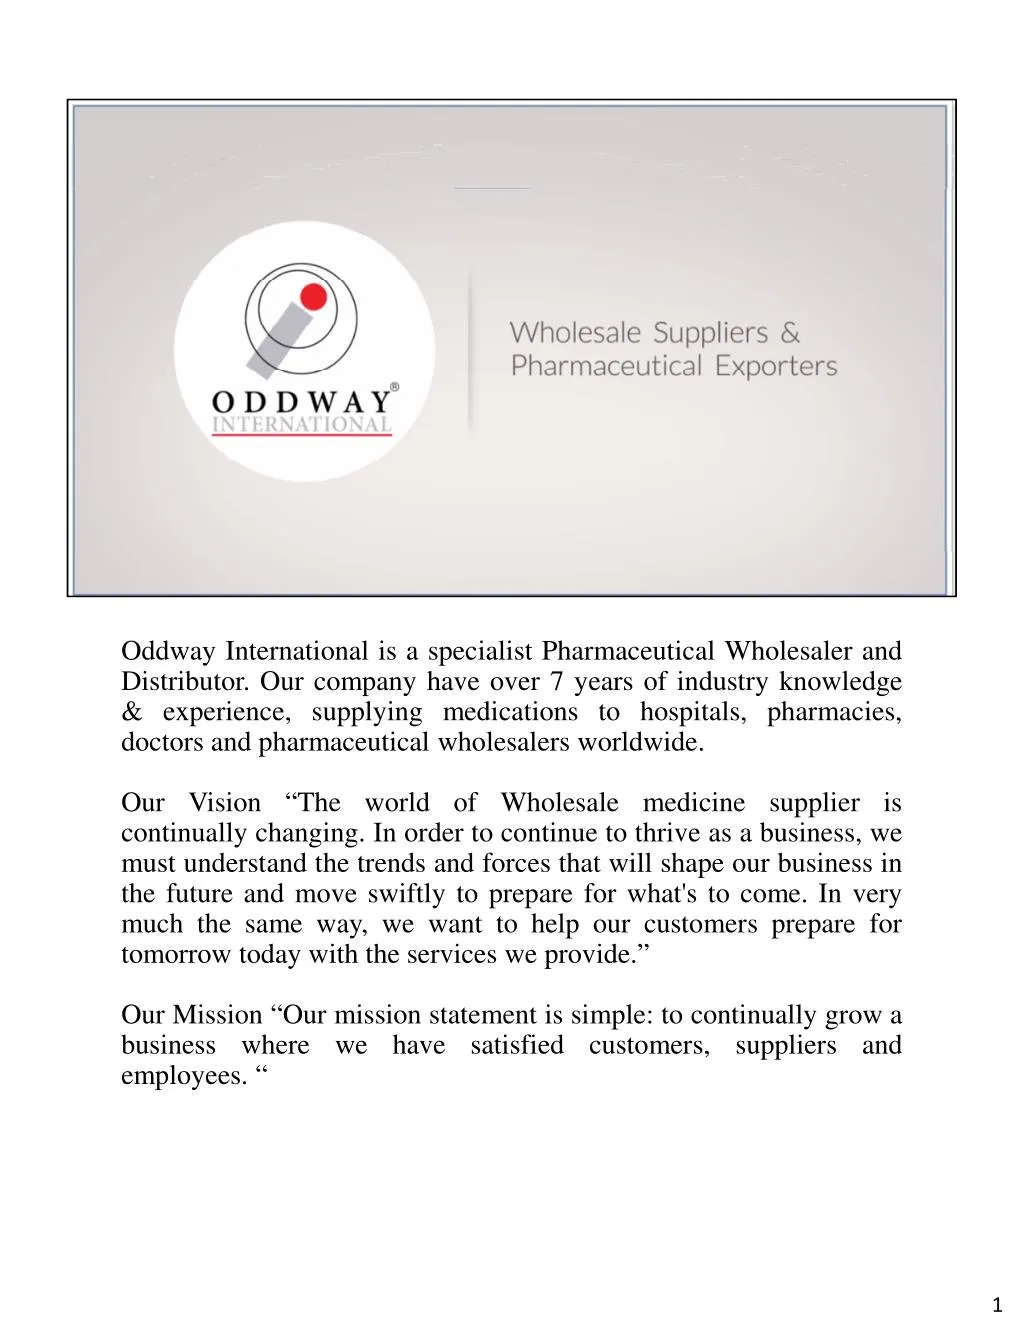 oddway international is a specialist